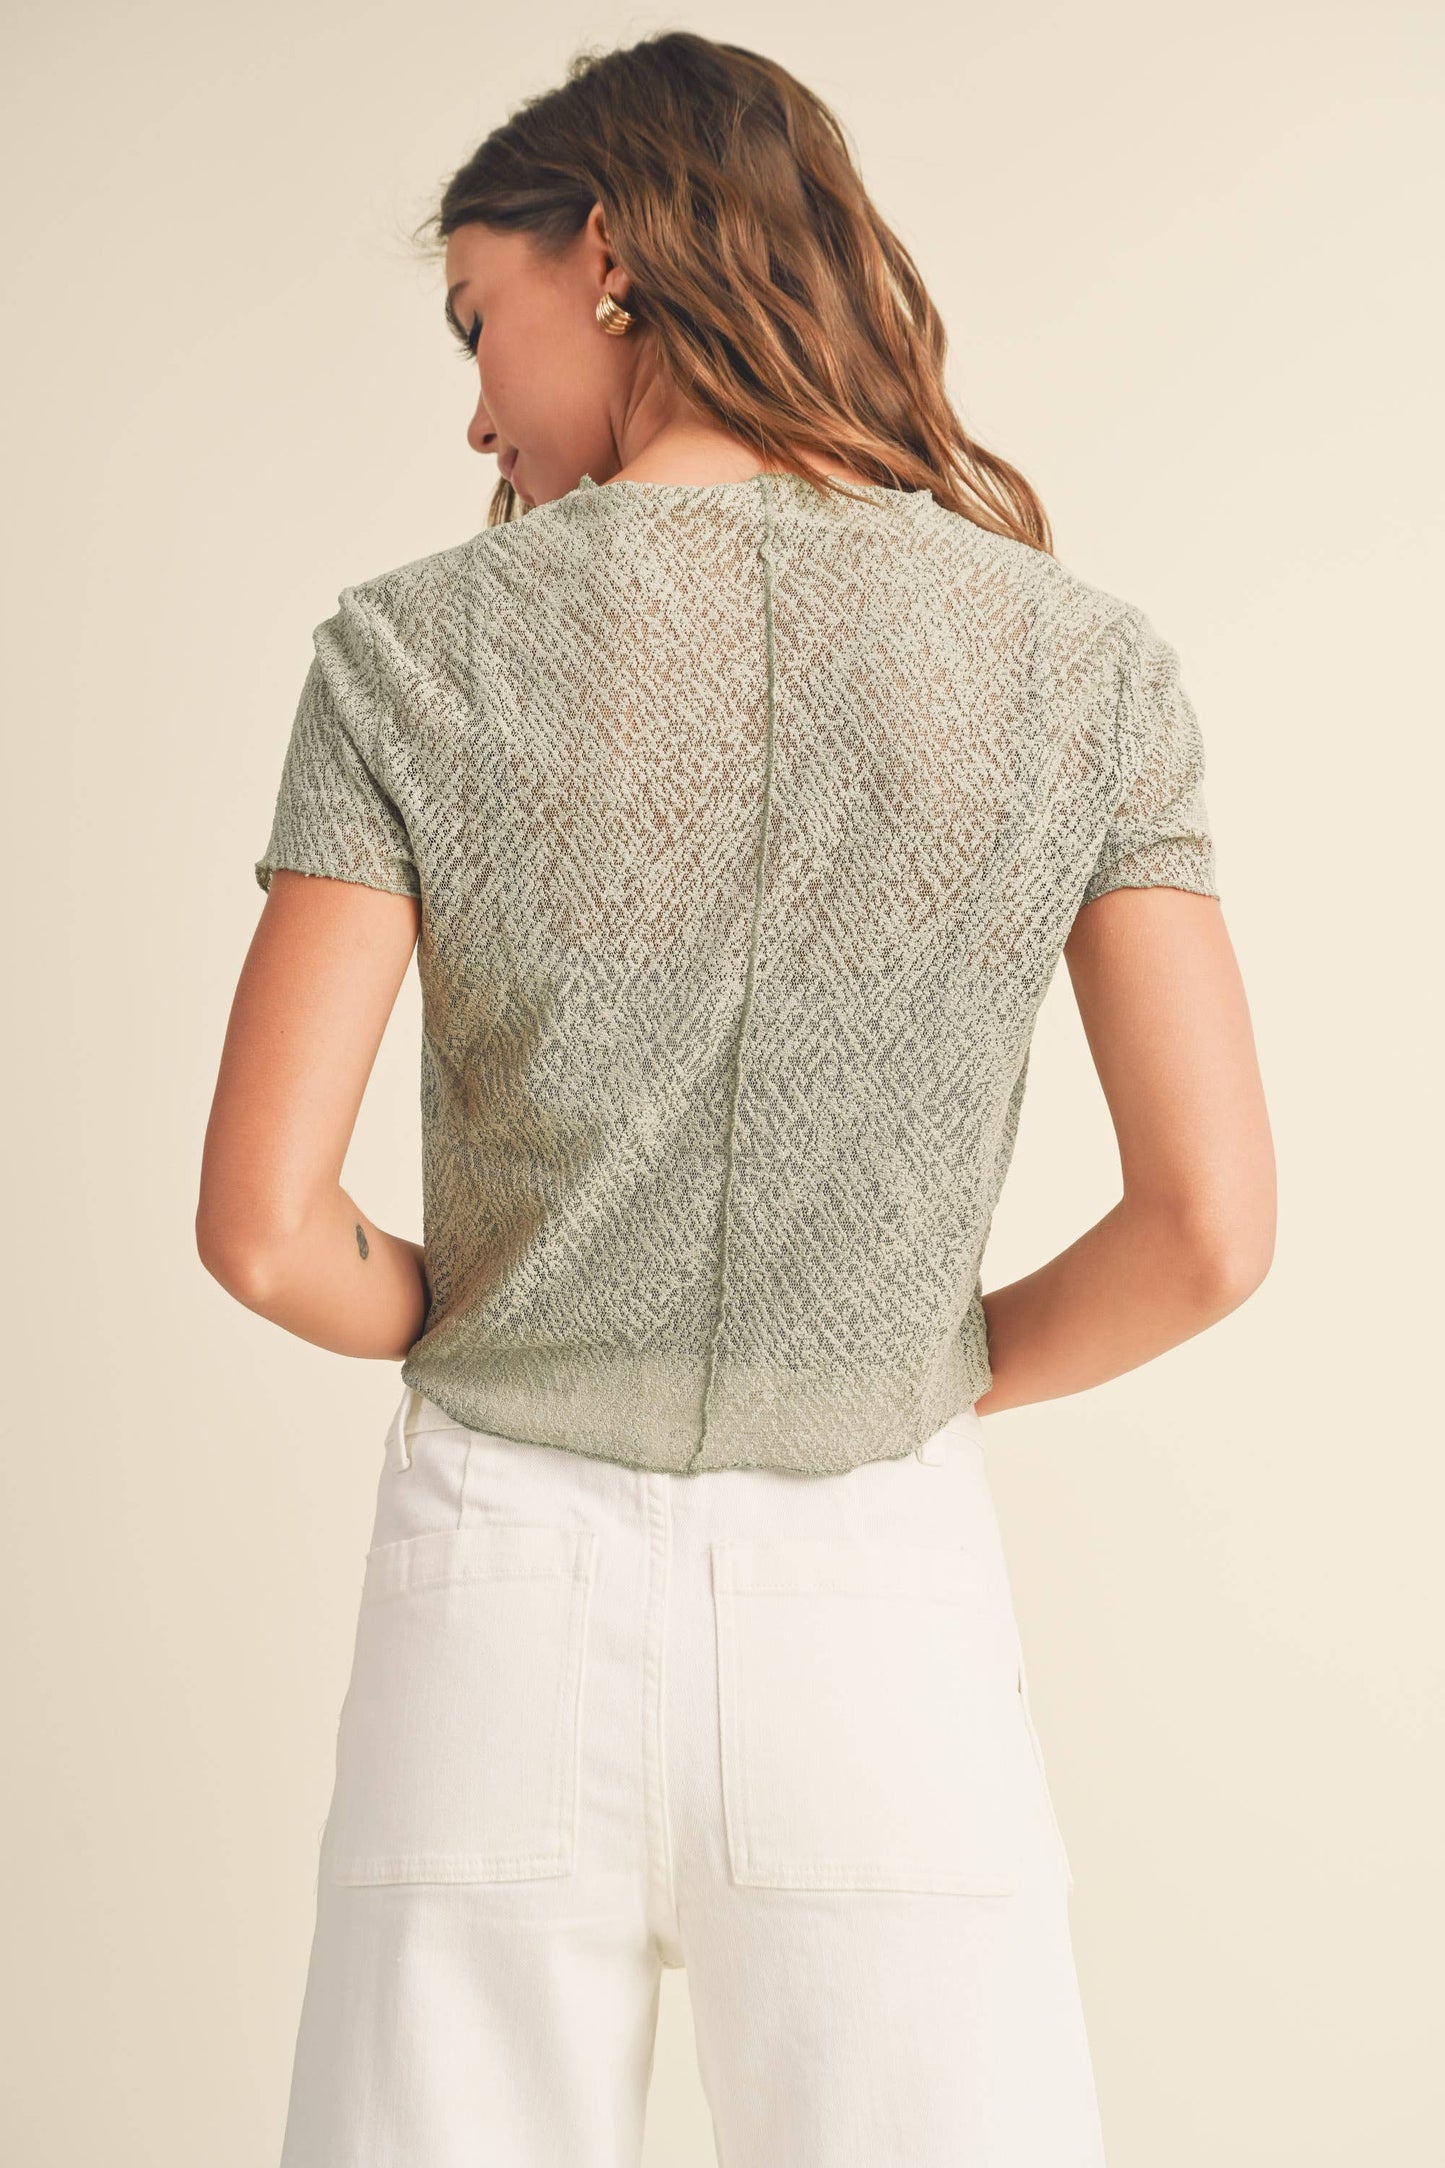 Patterned Fabric Top with Tank Top | Sage